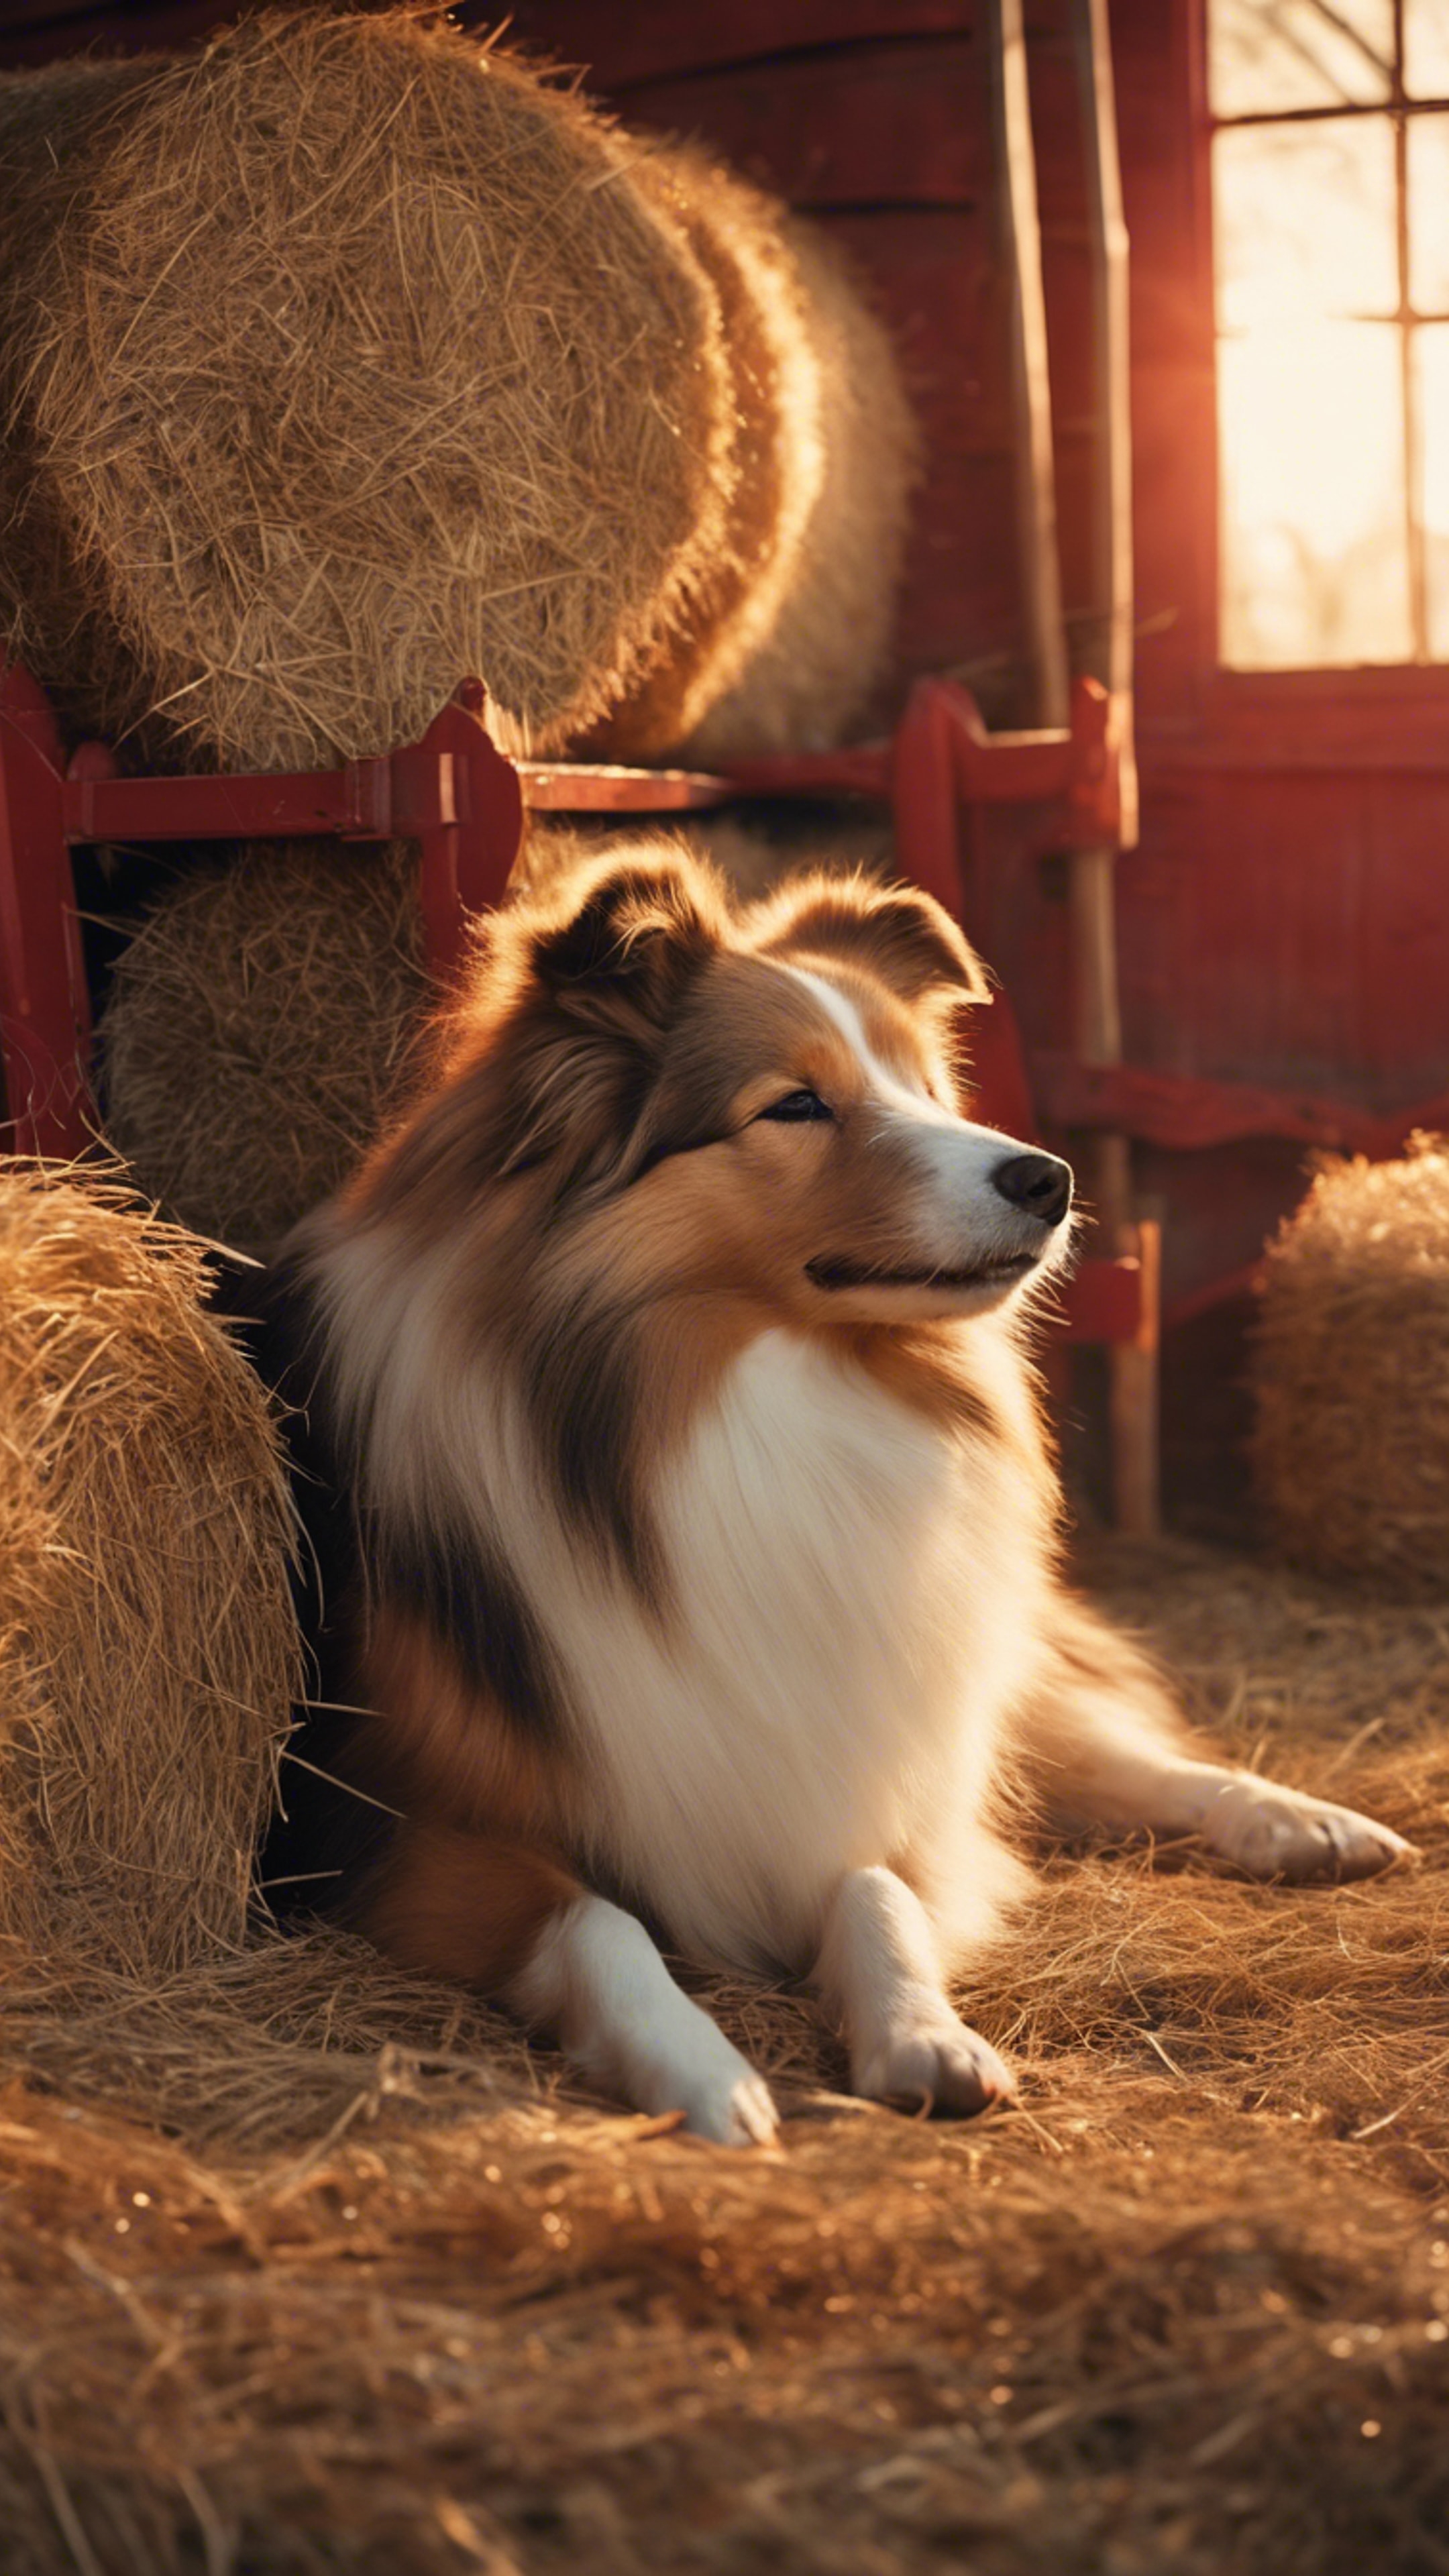 A Shetland Sheepdog sleeping in a vintage red barn, surrounded by hay balls and a setting sun. Tapeta[4b8e09167f2043c5830e]